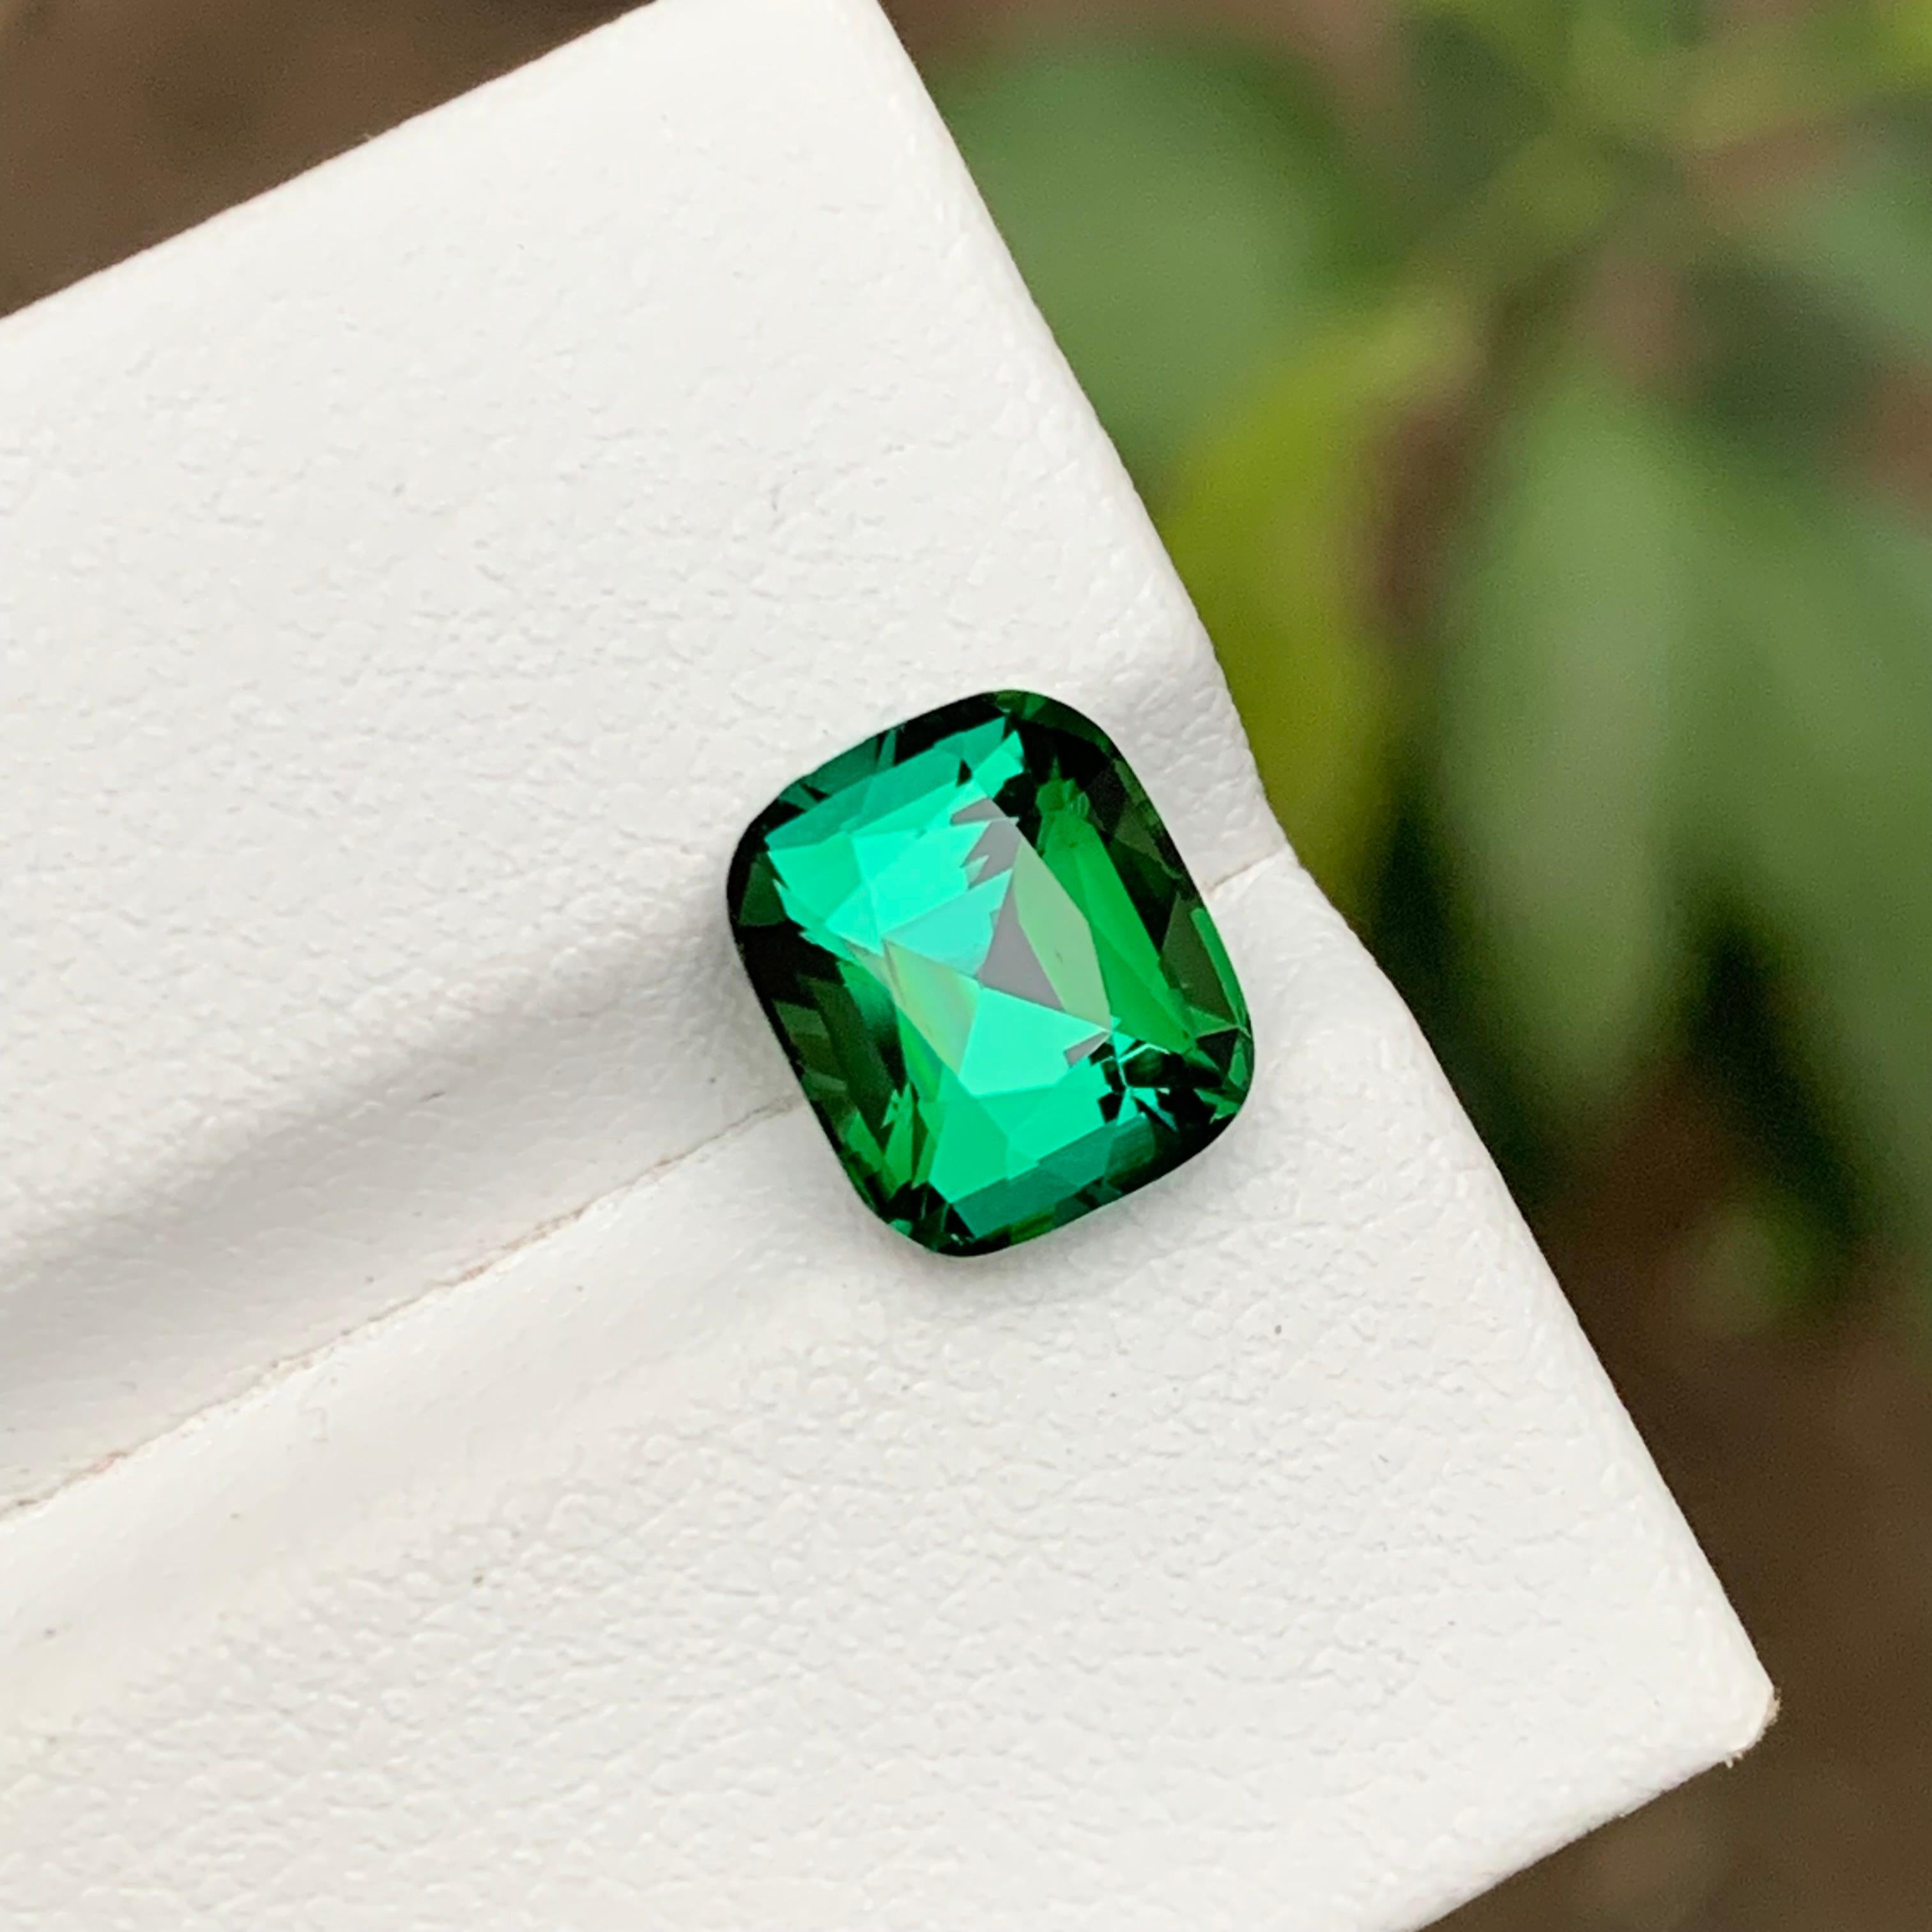 GEMSTONE TYPE: Tourmaline
PIECE(S): 1
WEIGHT: 2.70 Carat
SHAPE: Cushion 
SIZE (MM): 7.66 x 8.98 x 5.90
COLOR: Lagoon Green
CLARITY: Eye Clean
TREATMENT: None
ORIGIN: Afghanistan
CERTIFICATE: On demand

This stunning 2.70 carat natural lagoon green